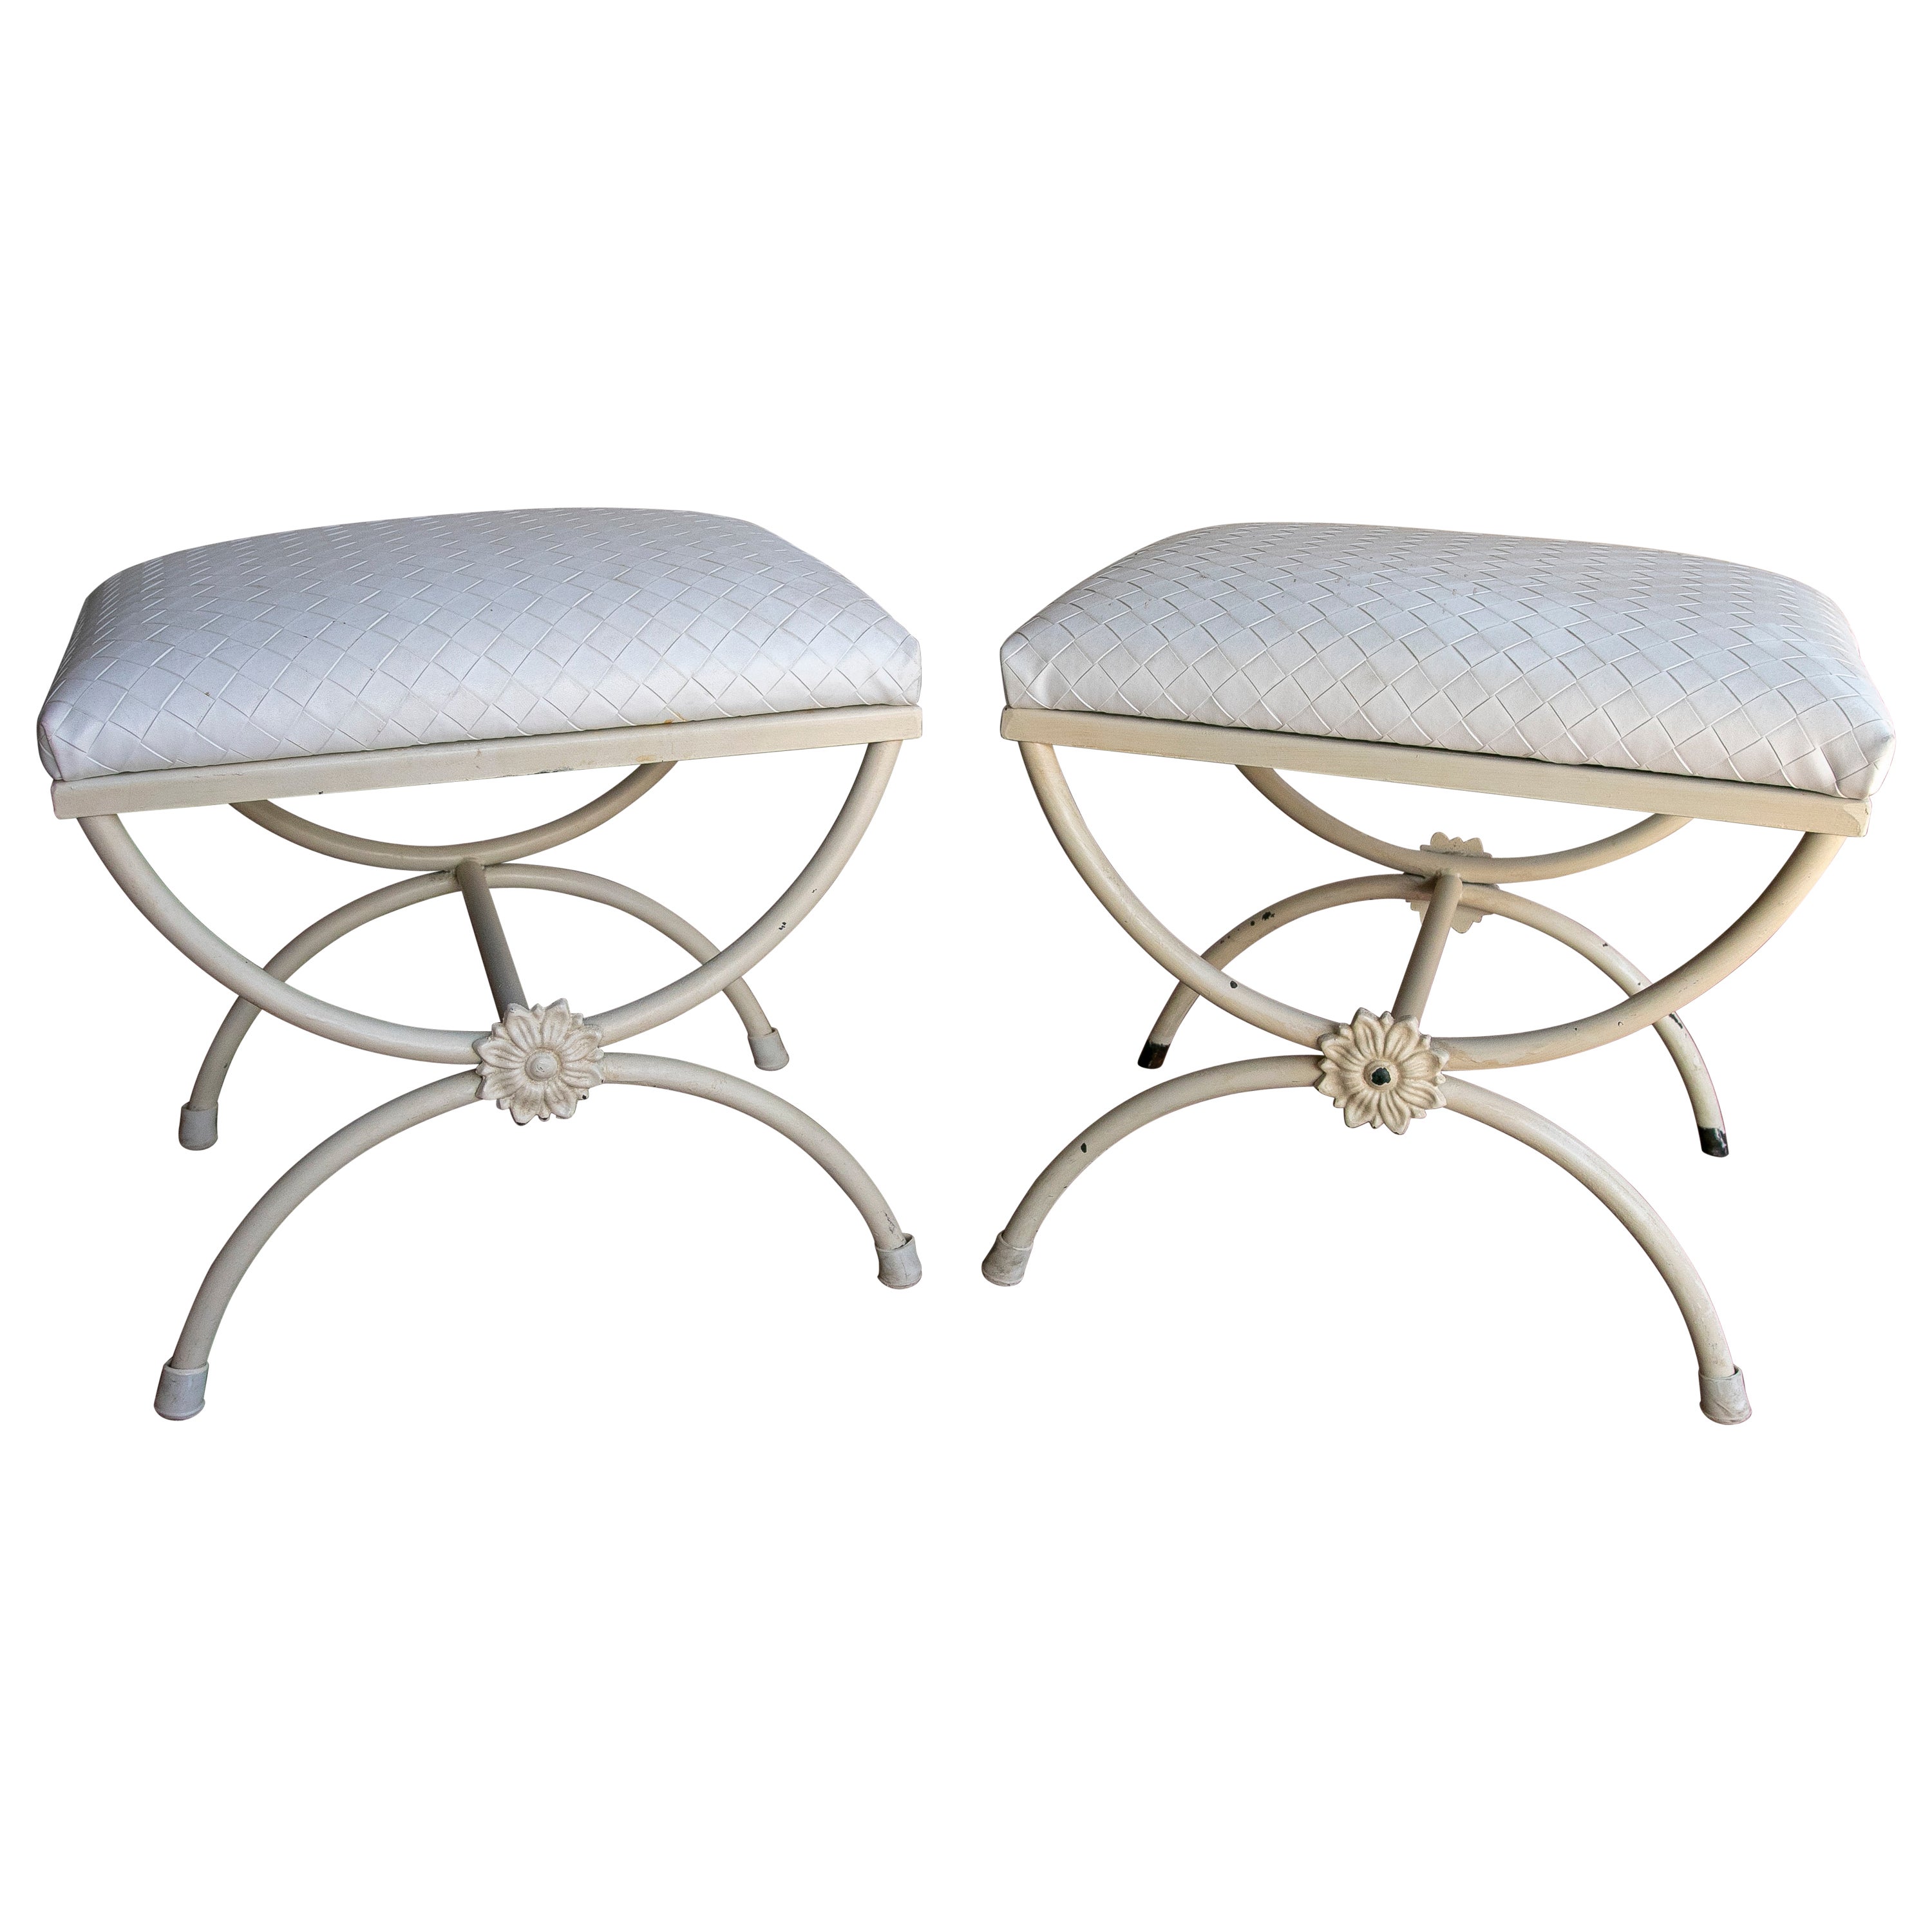 1980s Pair of White Painted Iron Armchairs For Sale